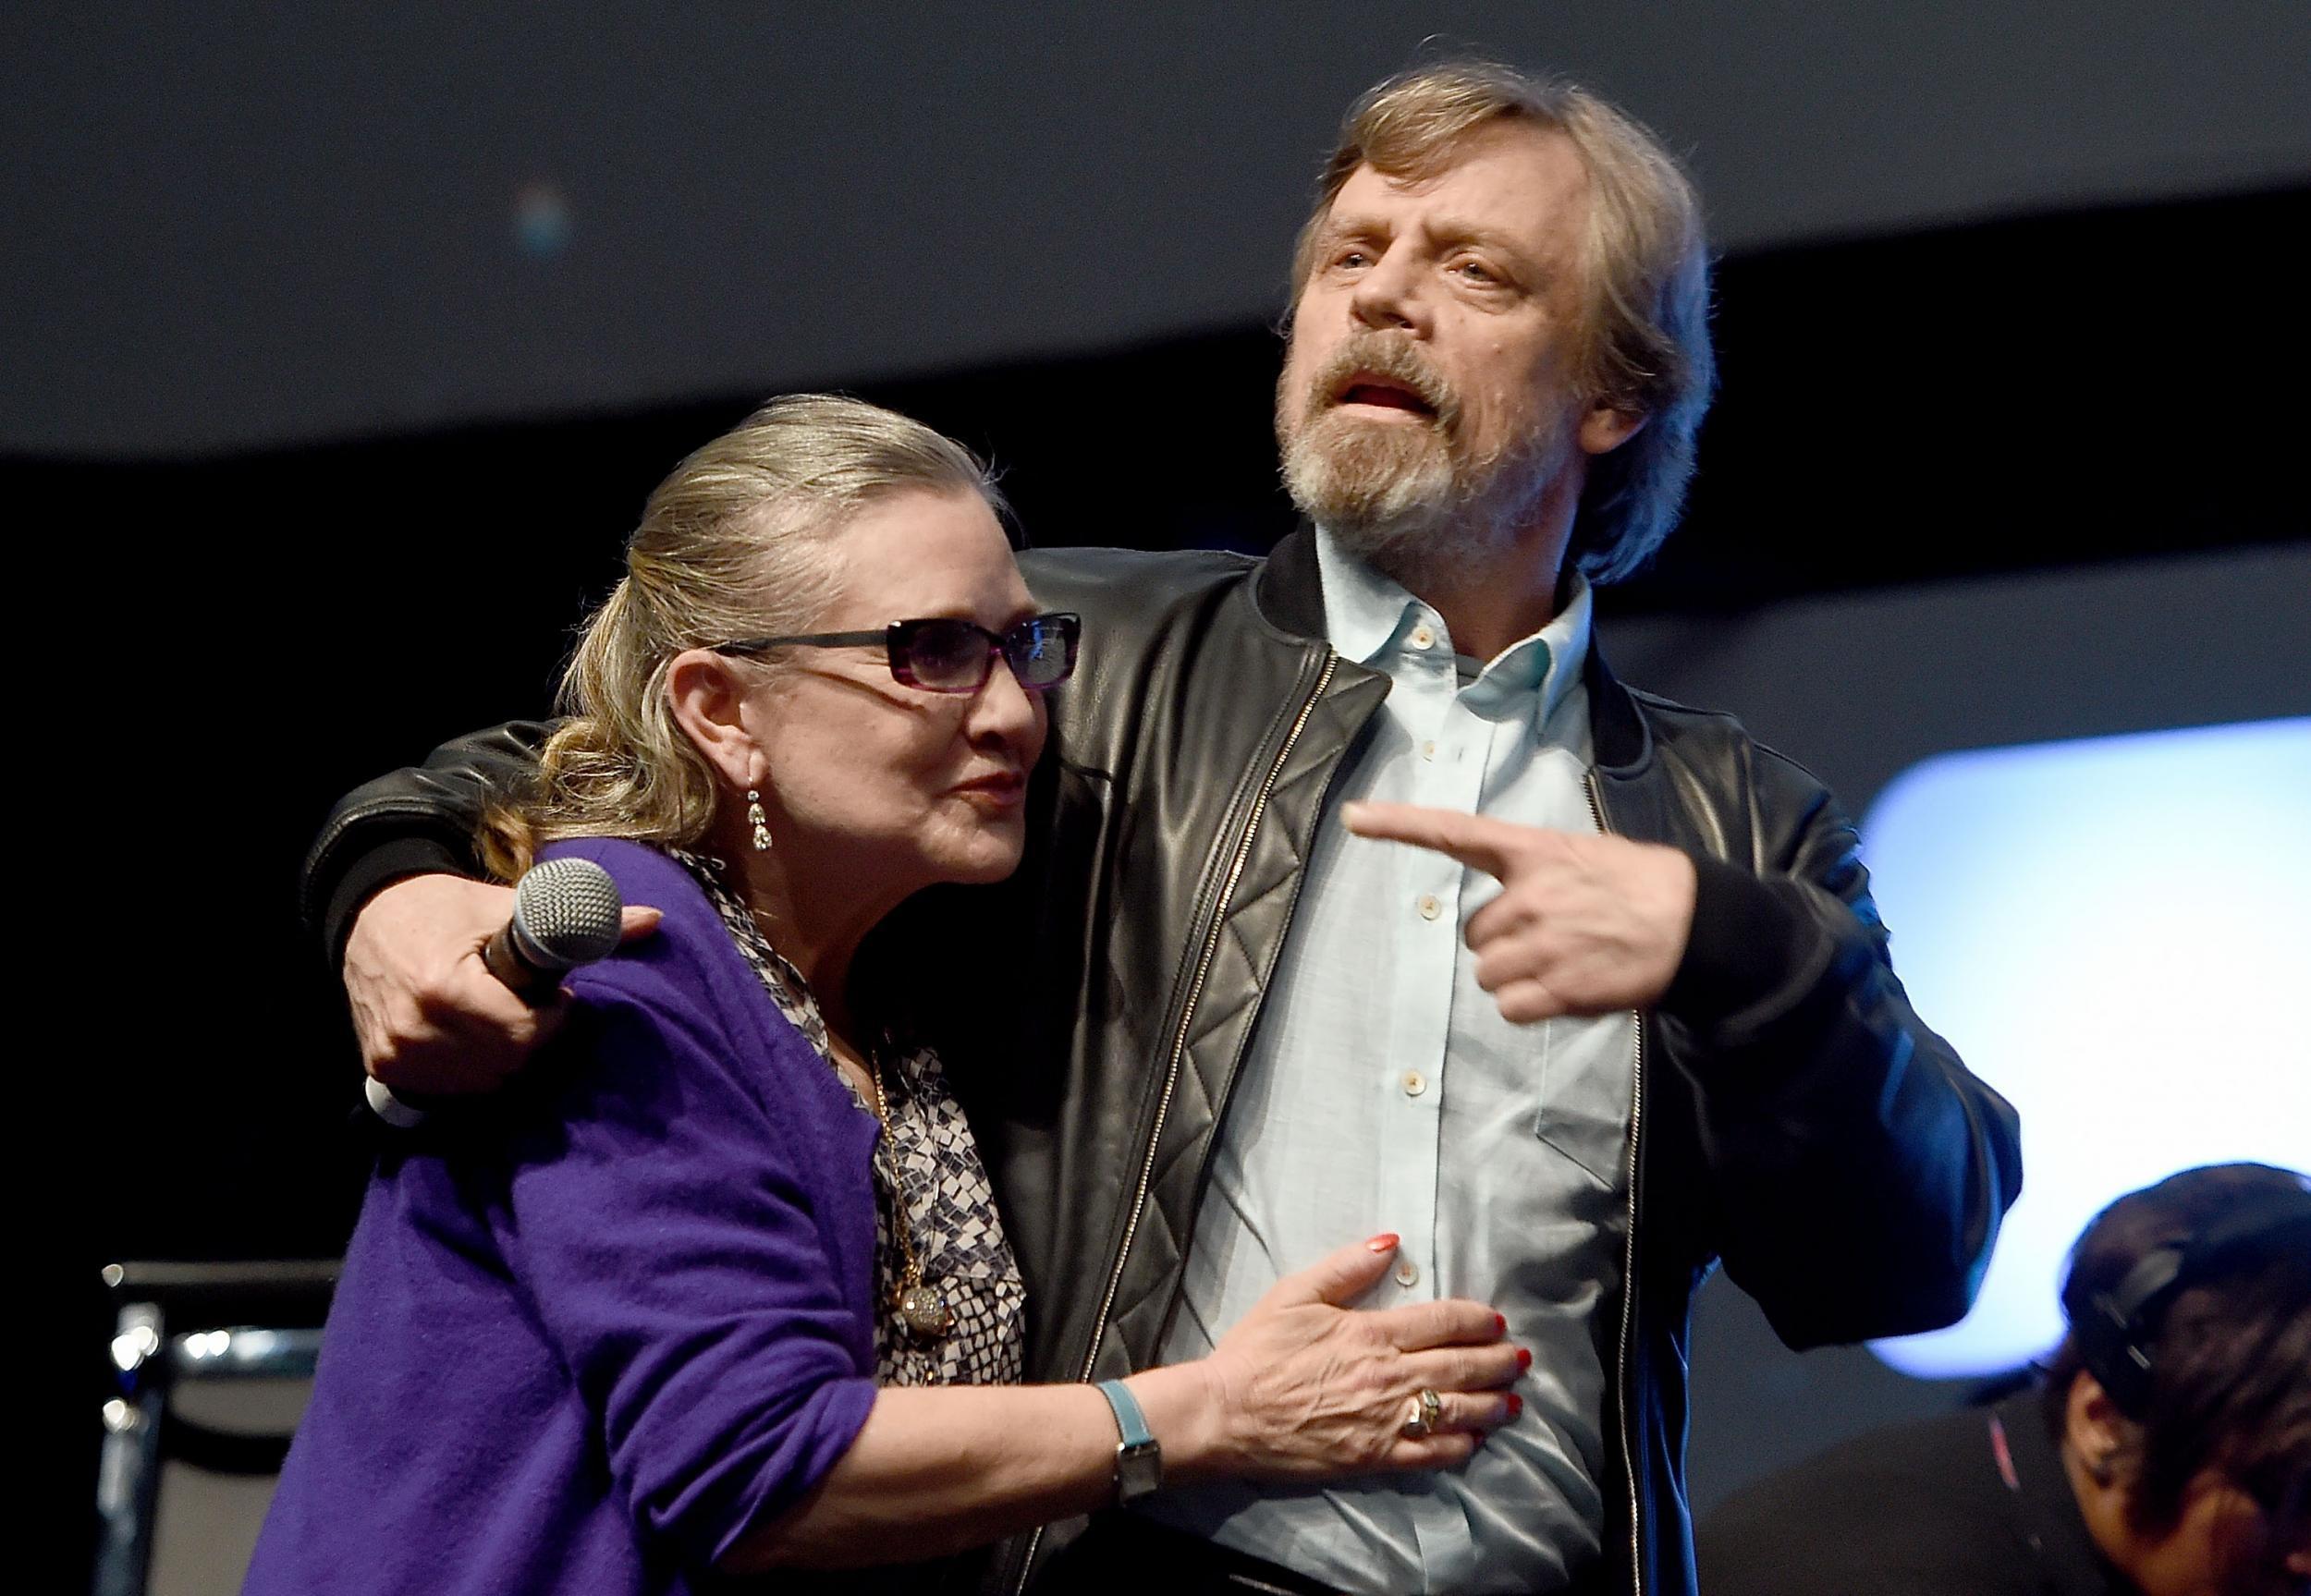 Carrie Fisher and Mark Hamill at the 2016 Star Wars Celebration